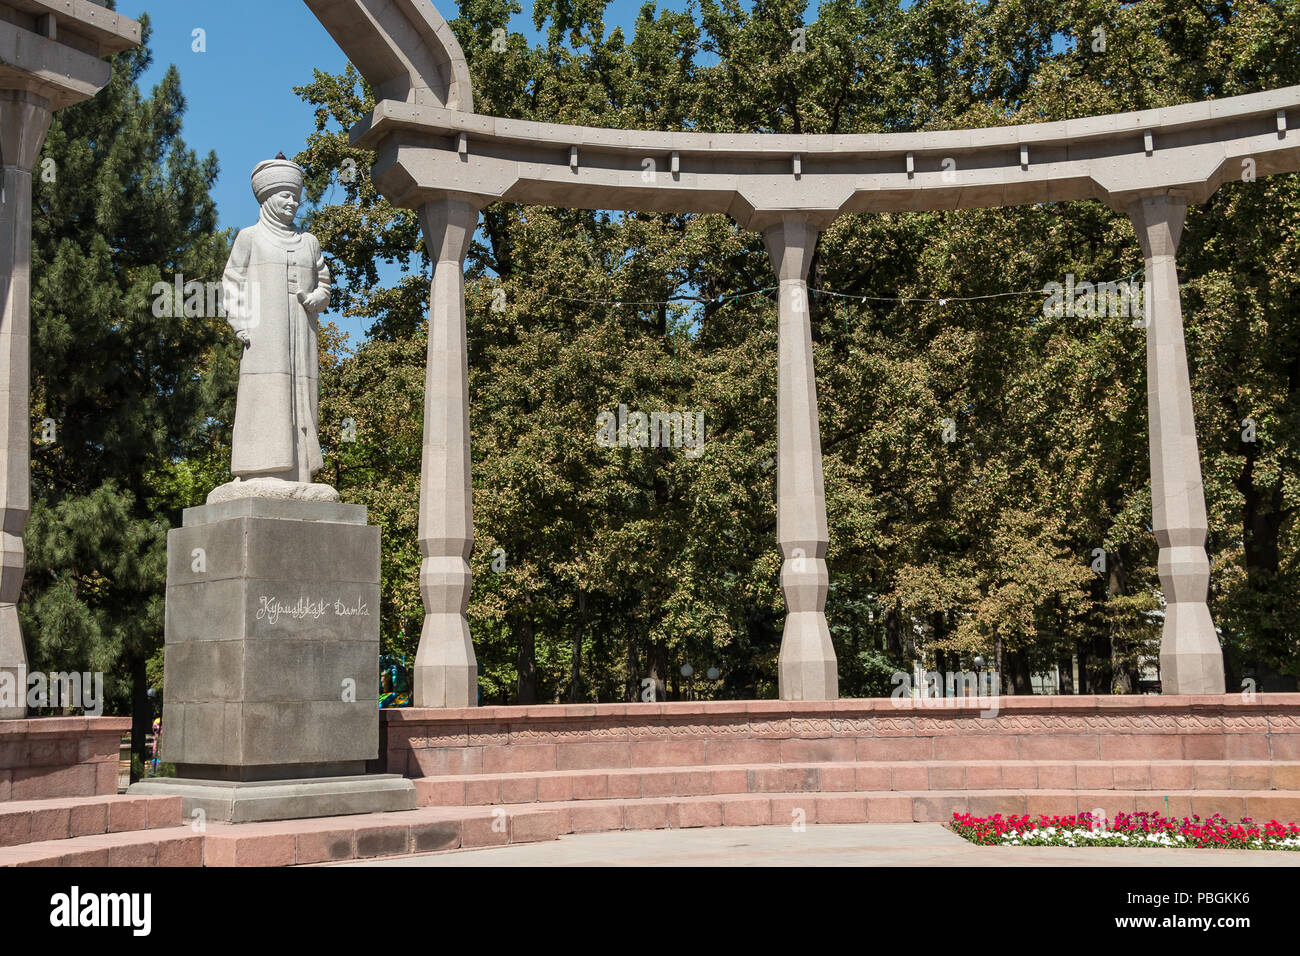 Statue of Kurmanjan Datka, a famous politican and stateswoman, in Bishkek, the capital of Kyrgyzstan Stock Photo